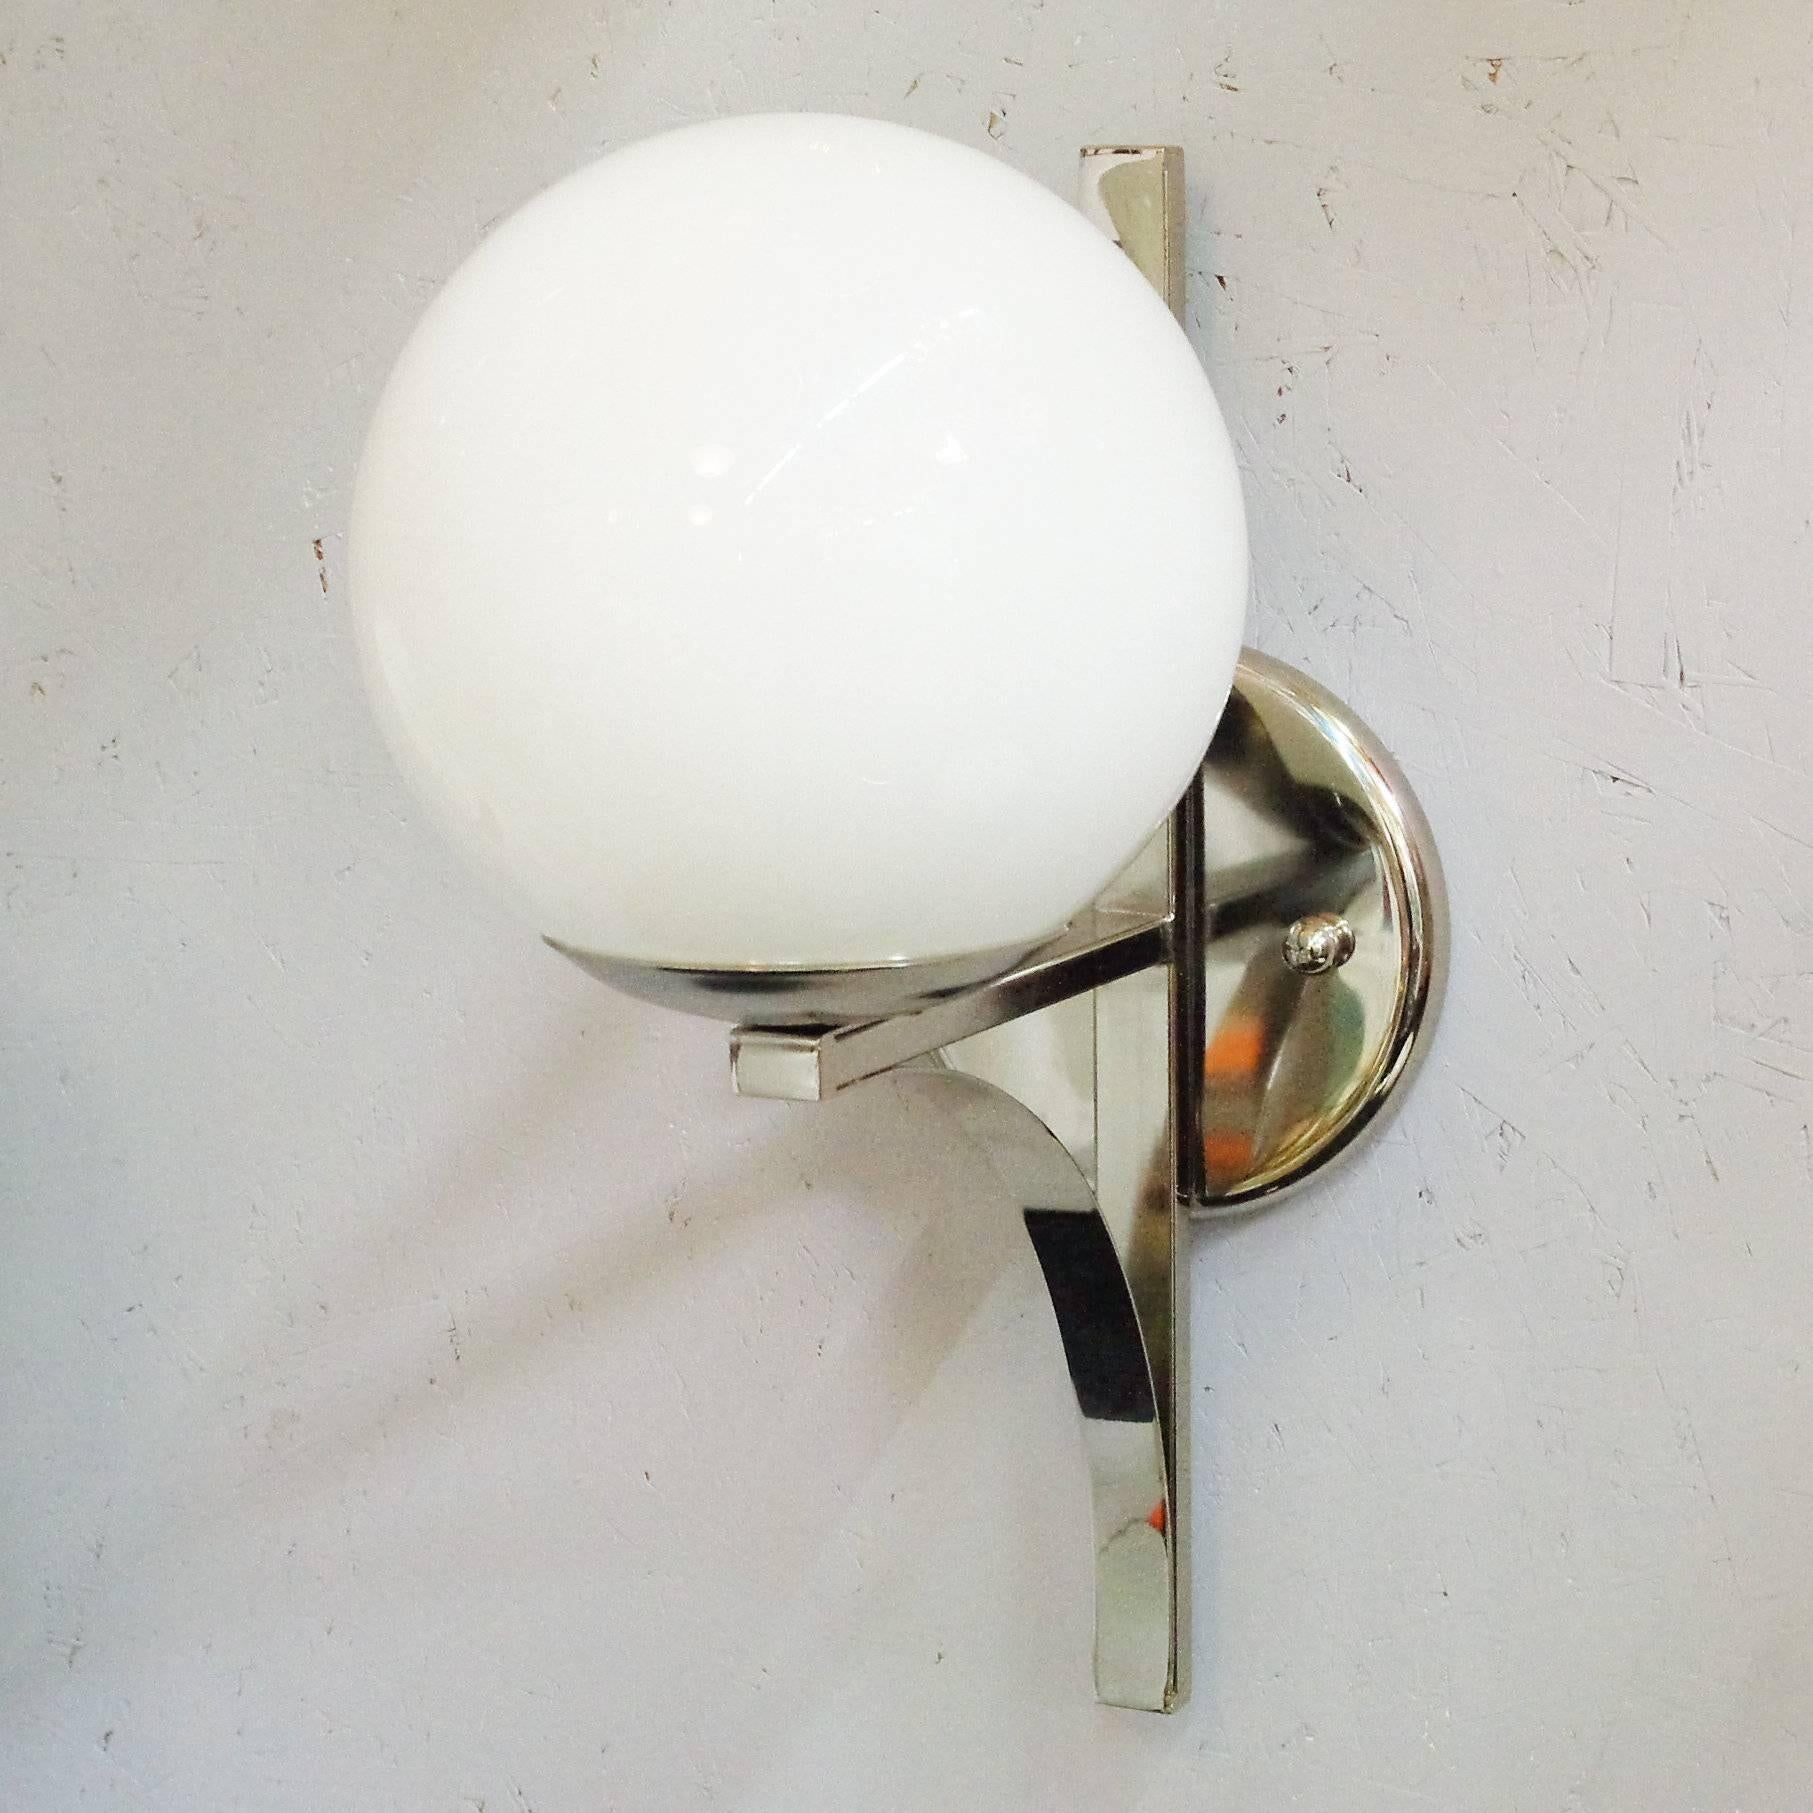 Pair of Murano glass white globe mounted on solid nickel bracket sconces in the style Sergio Mazza
Single standard light socket / Wired for the US.